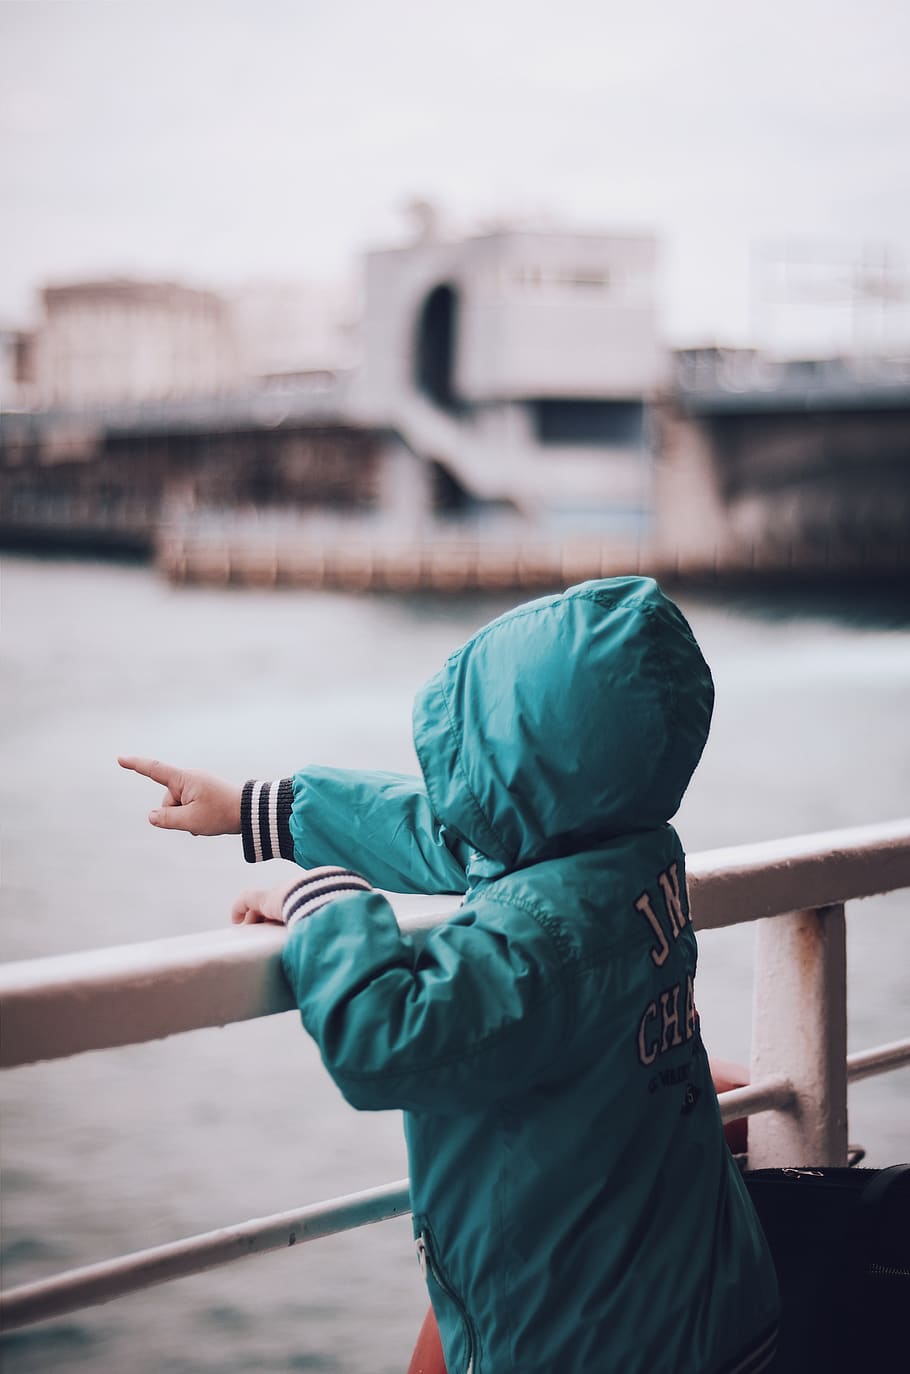 Toddler Wearing Green Hooded Jacket Pointing Right Index Finger, HD wallpaper